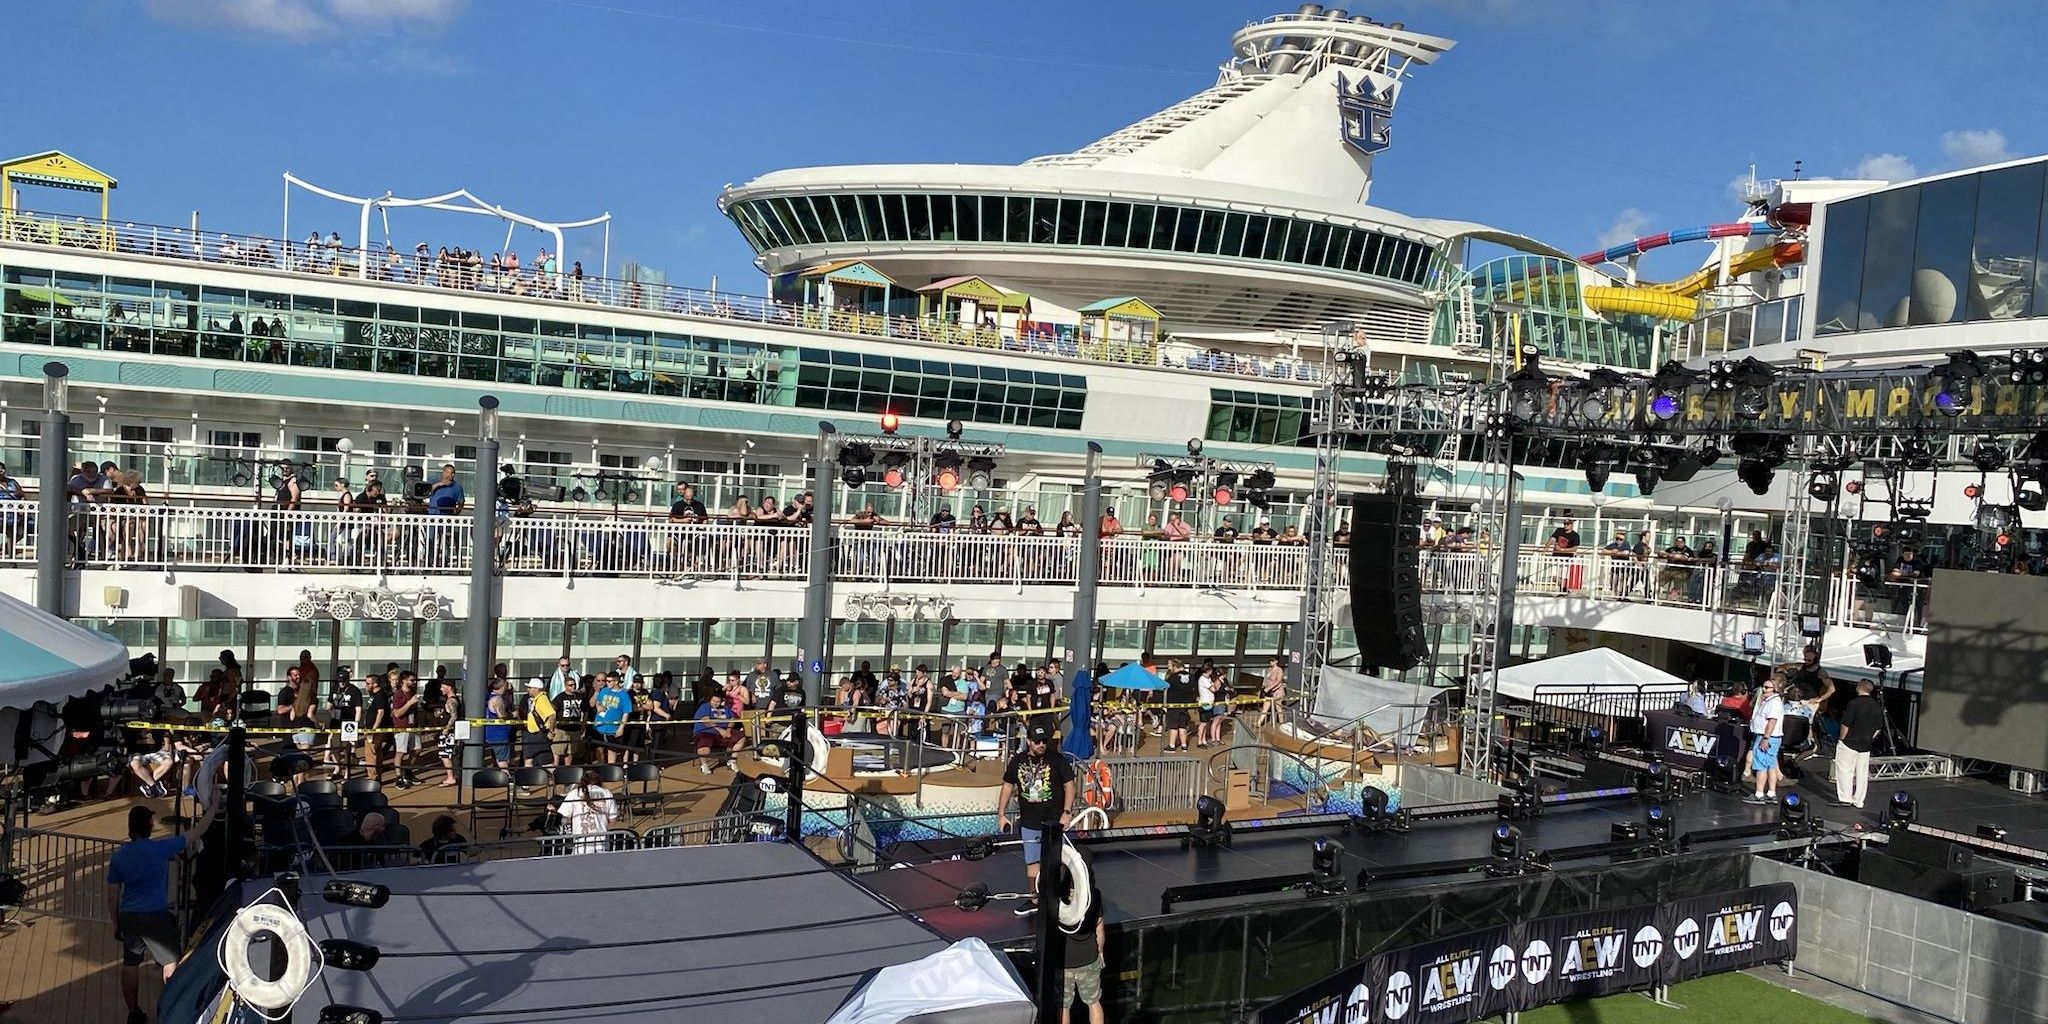 8 Things You Didn't Know Happened On The Chris Jericho Cruise